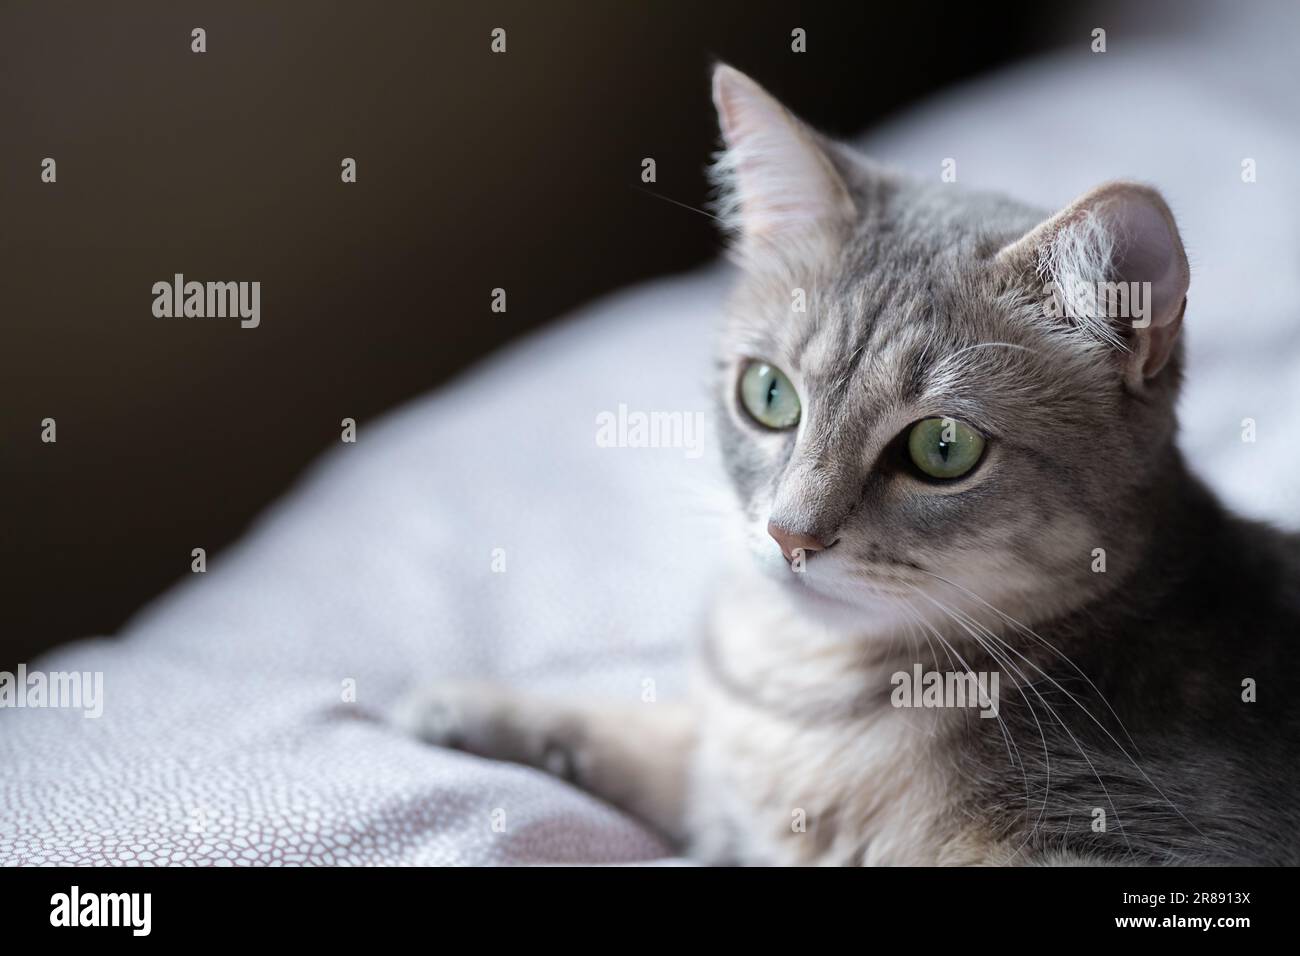 gray striped tabby cat lying on bed in domestic interior Stock Photo